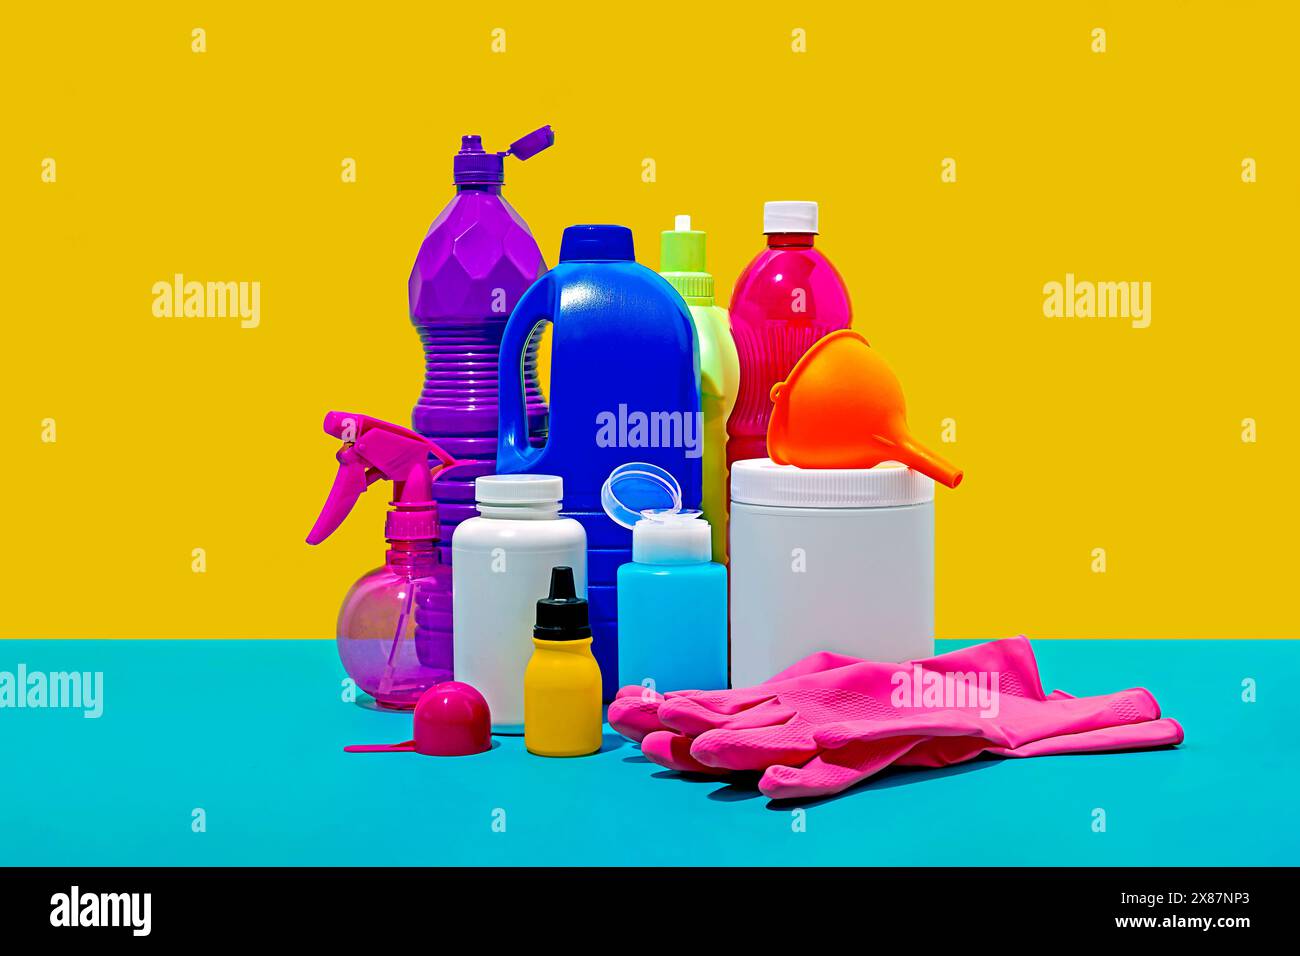 Still life of household cleaning products against yellow background Stock Photo